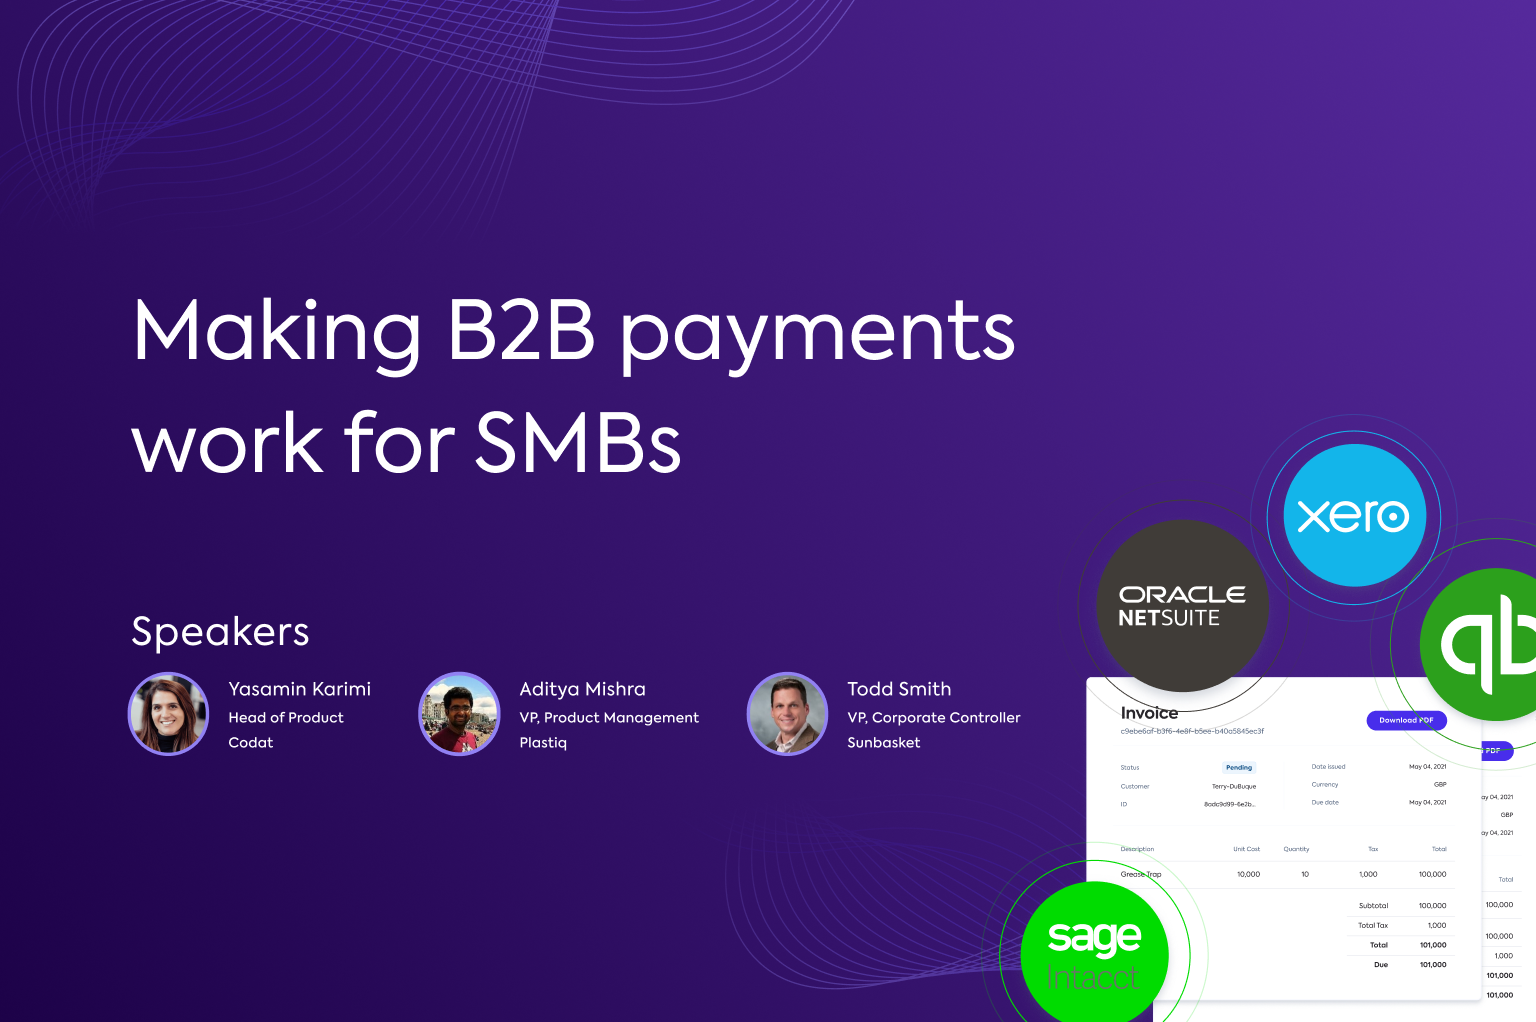 Making B2B payments work for SMBs